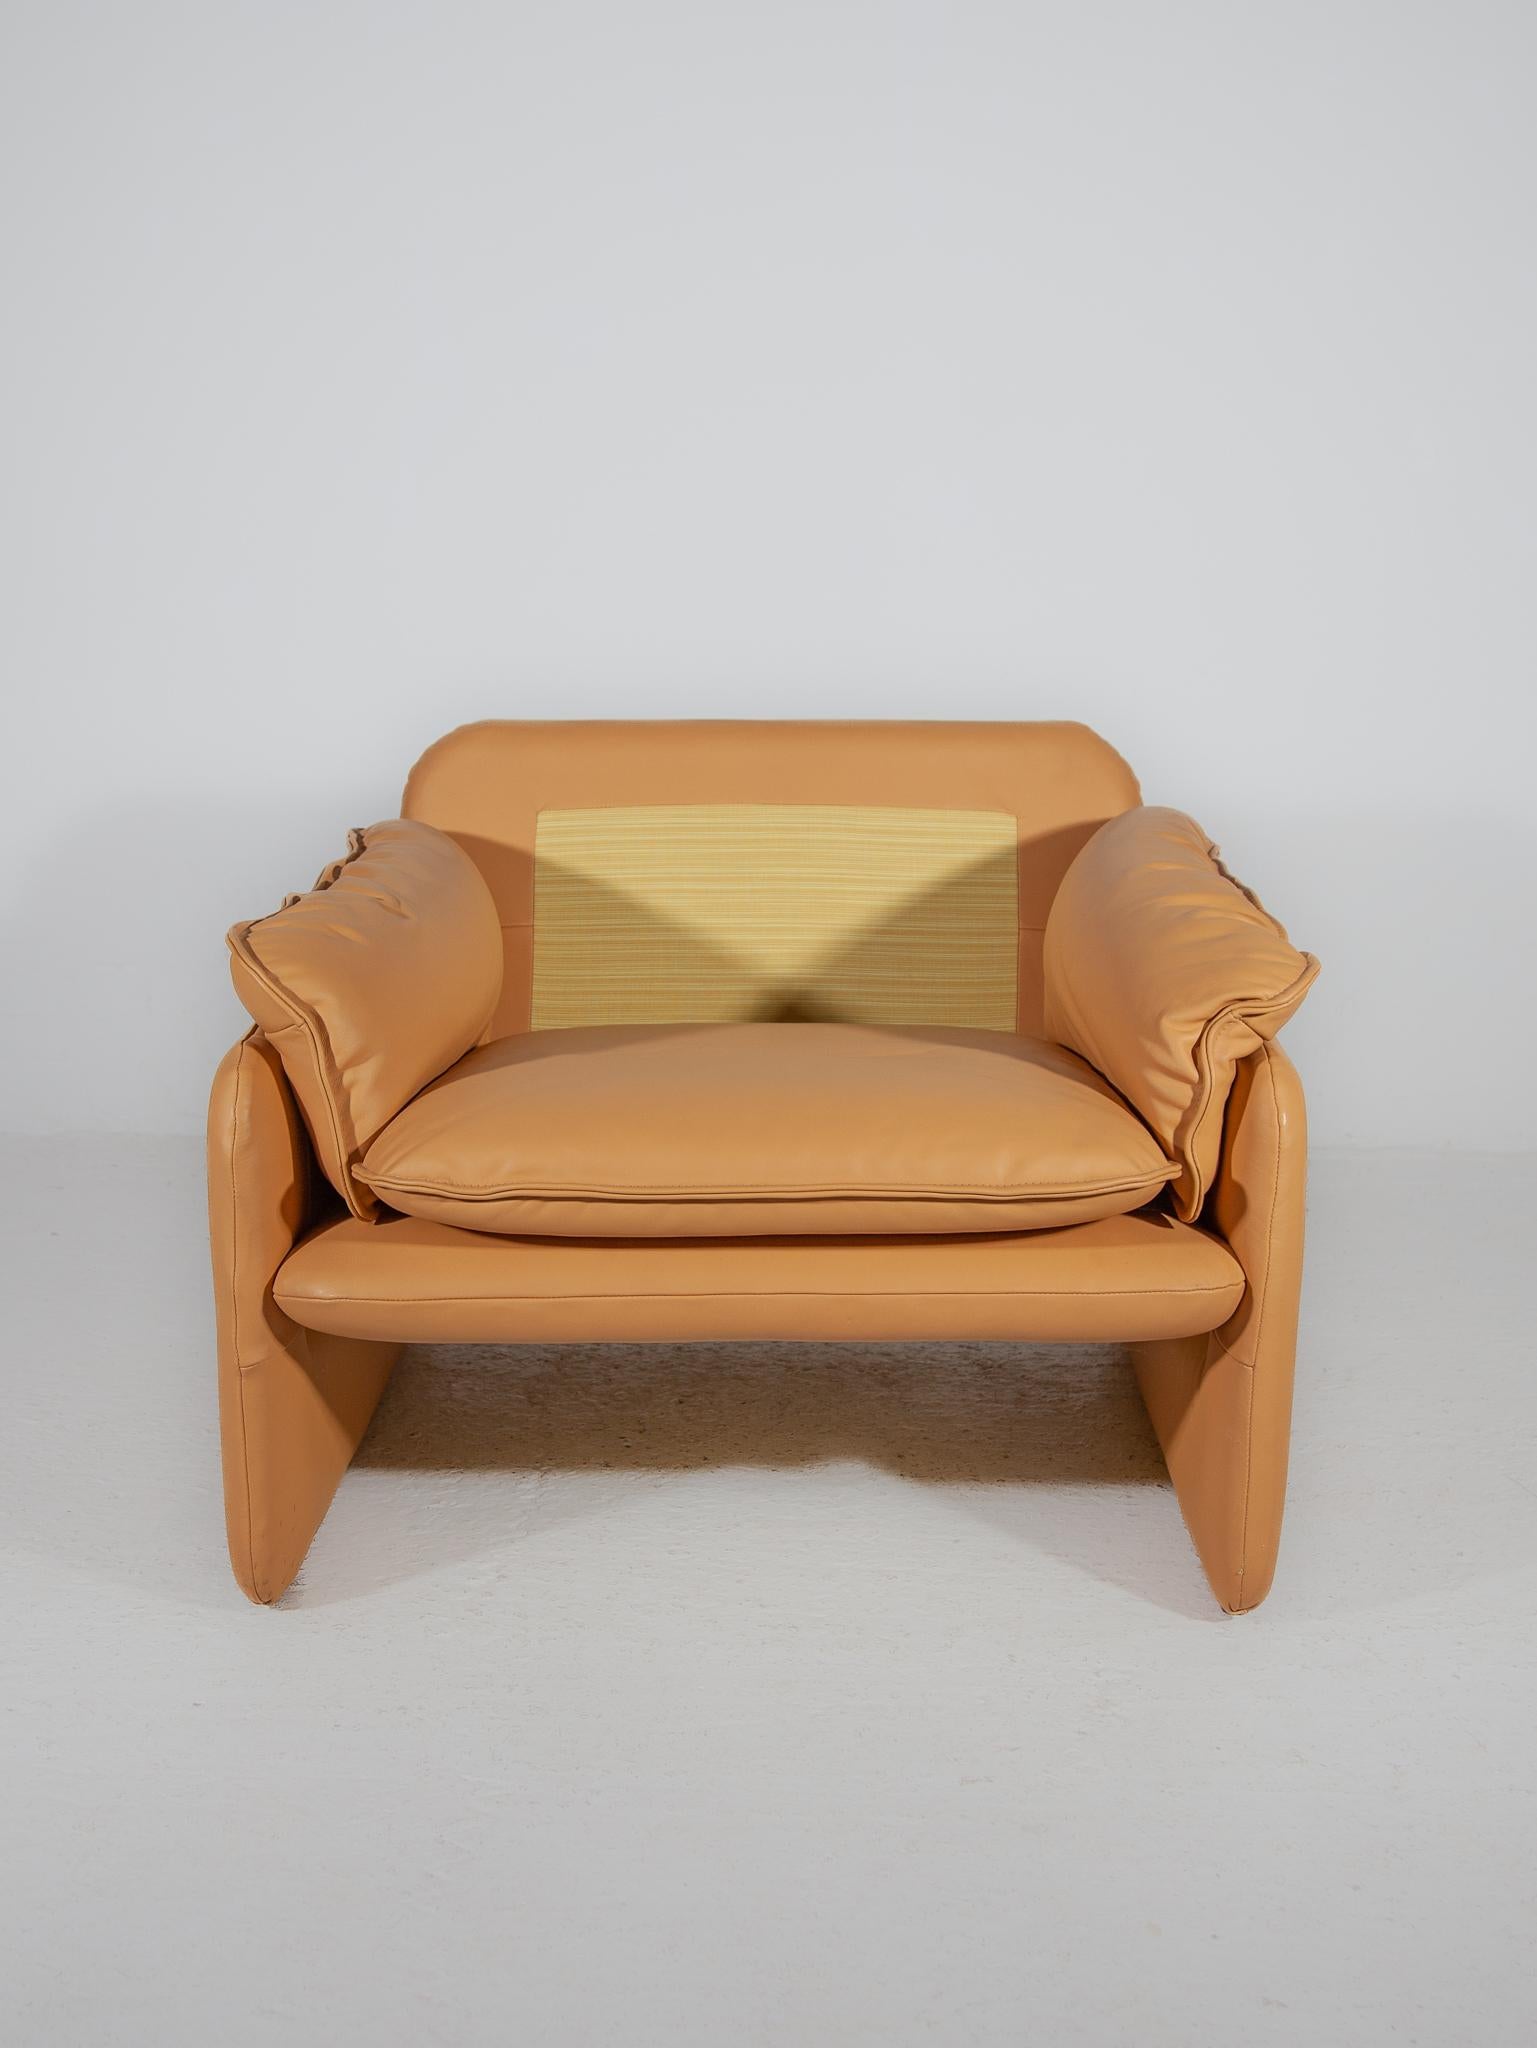 Set of 2 Ds-61 Armchairs Camel Leather designed by De Sede, 1970s In Good Condition For Sale In Antwerp, BE